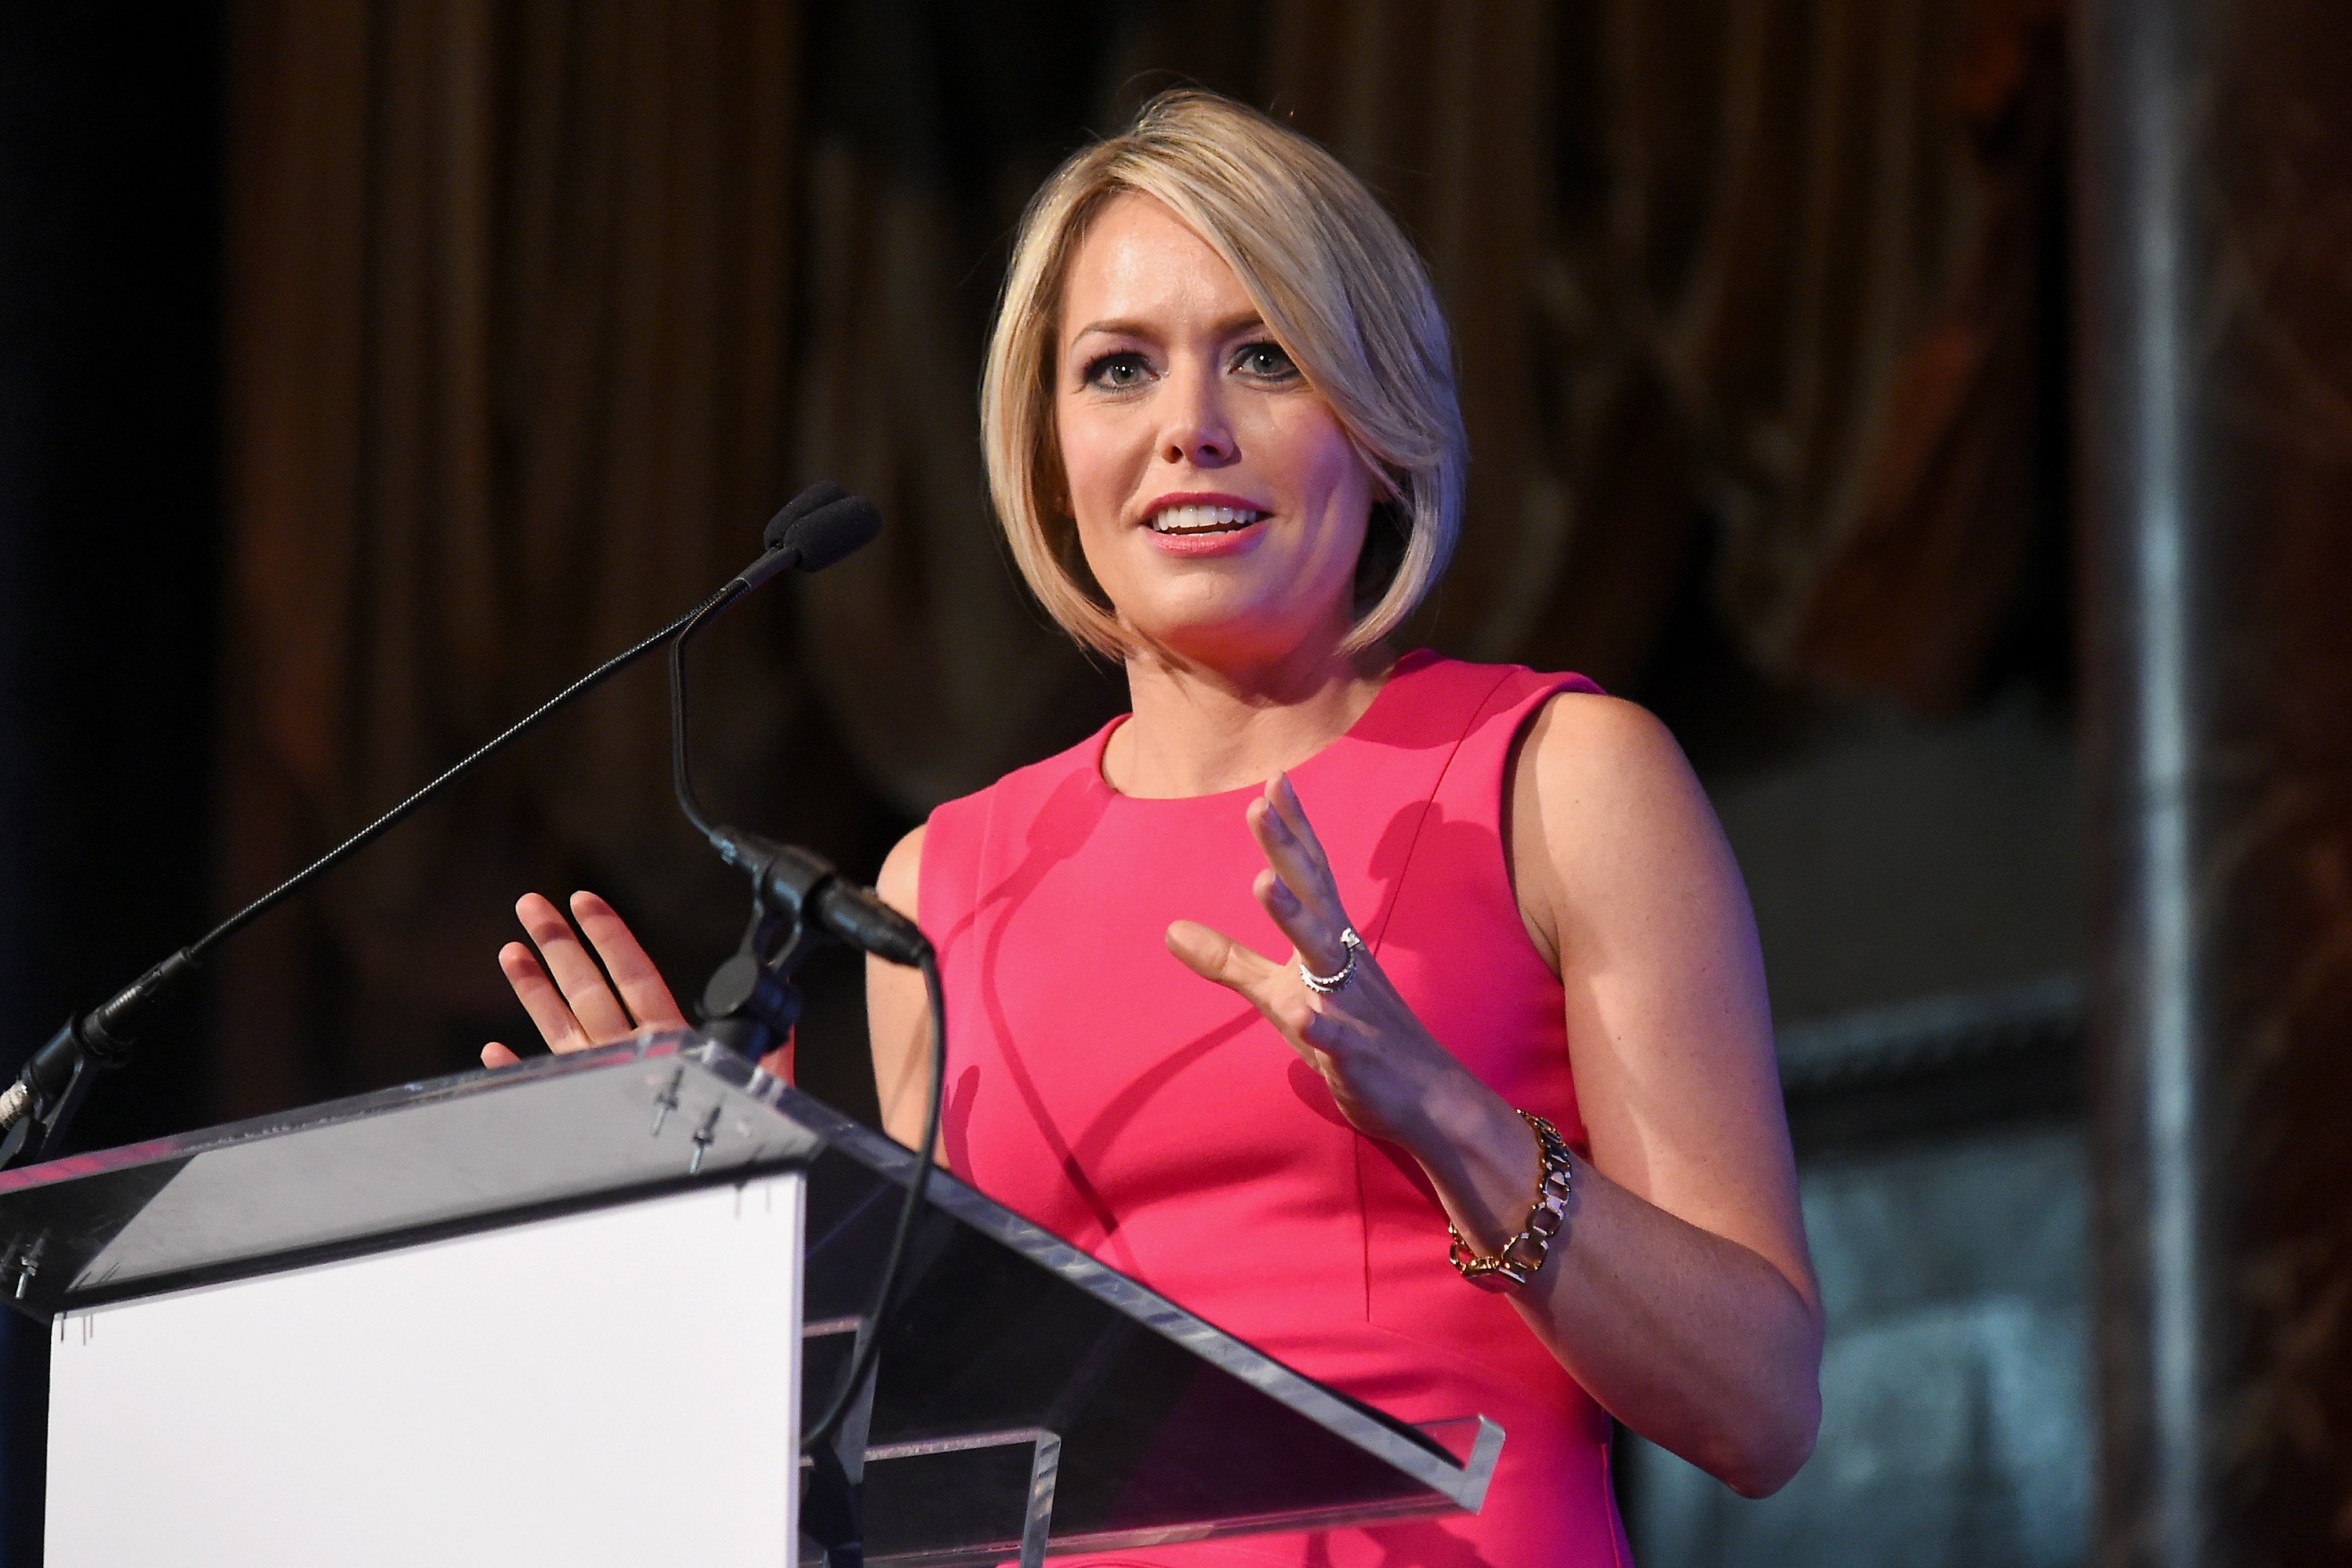 Meteorologist Dylan Dreyer during a 2017 luncheon event in New York City. | Photo: Getty Images